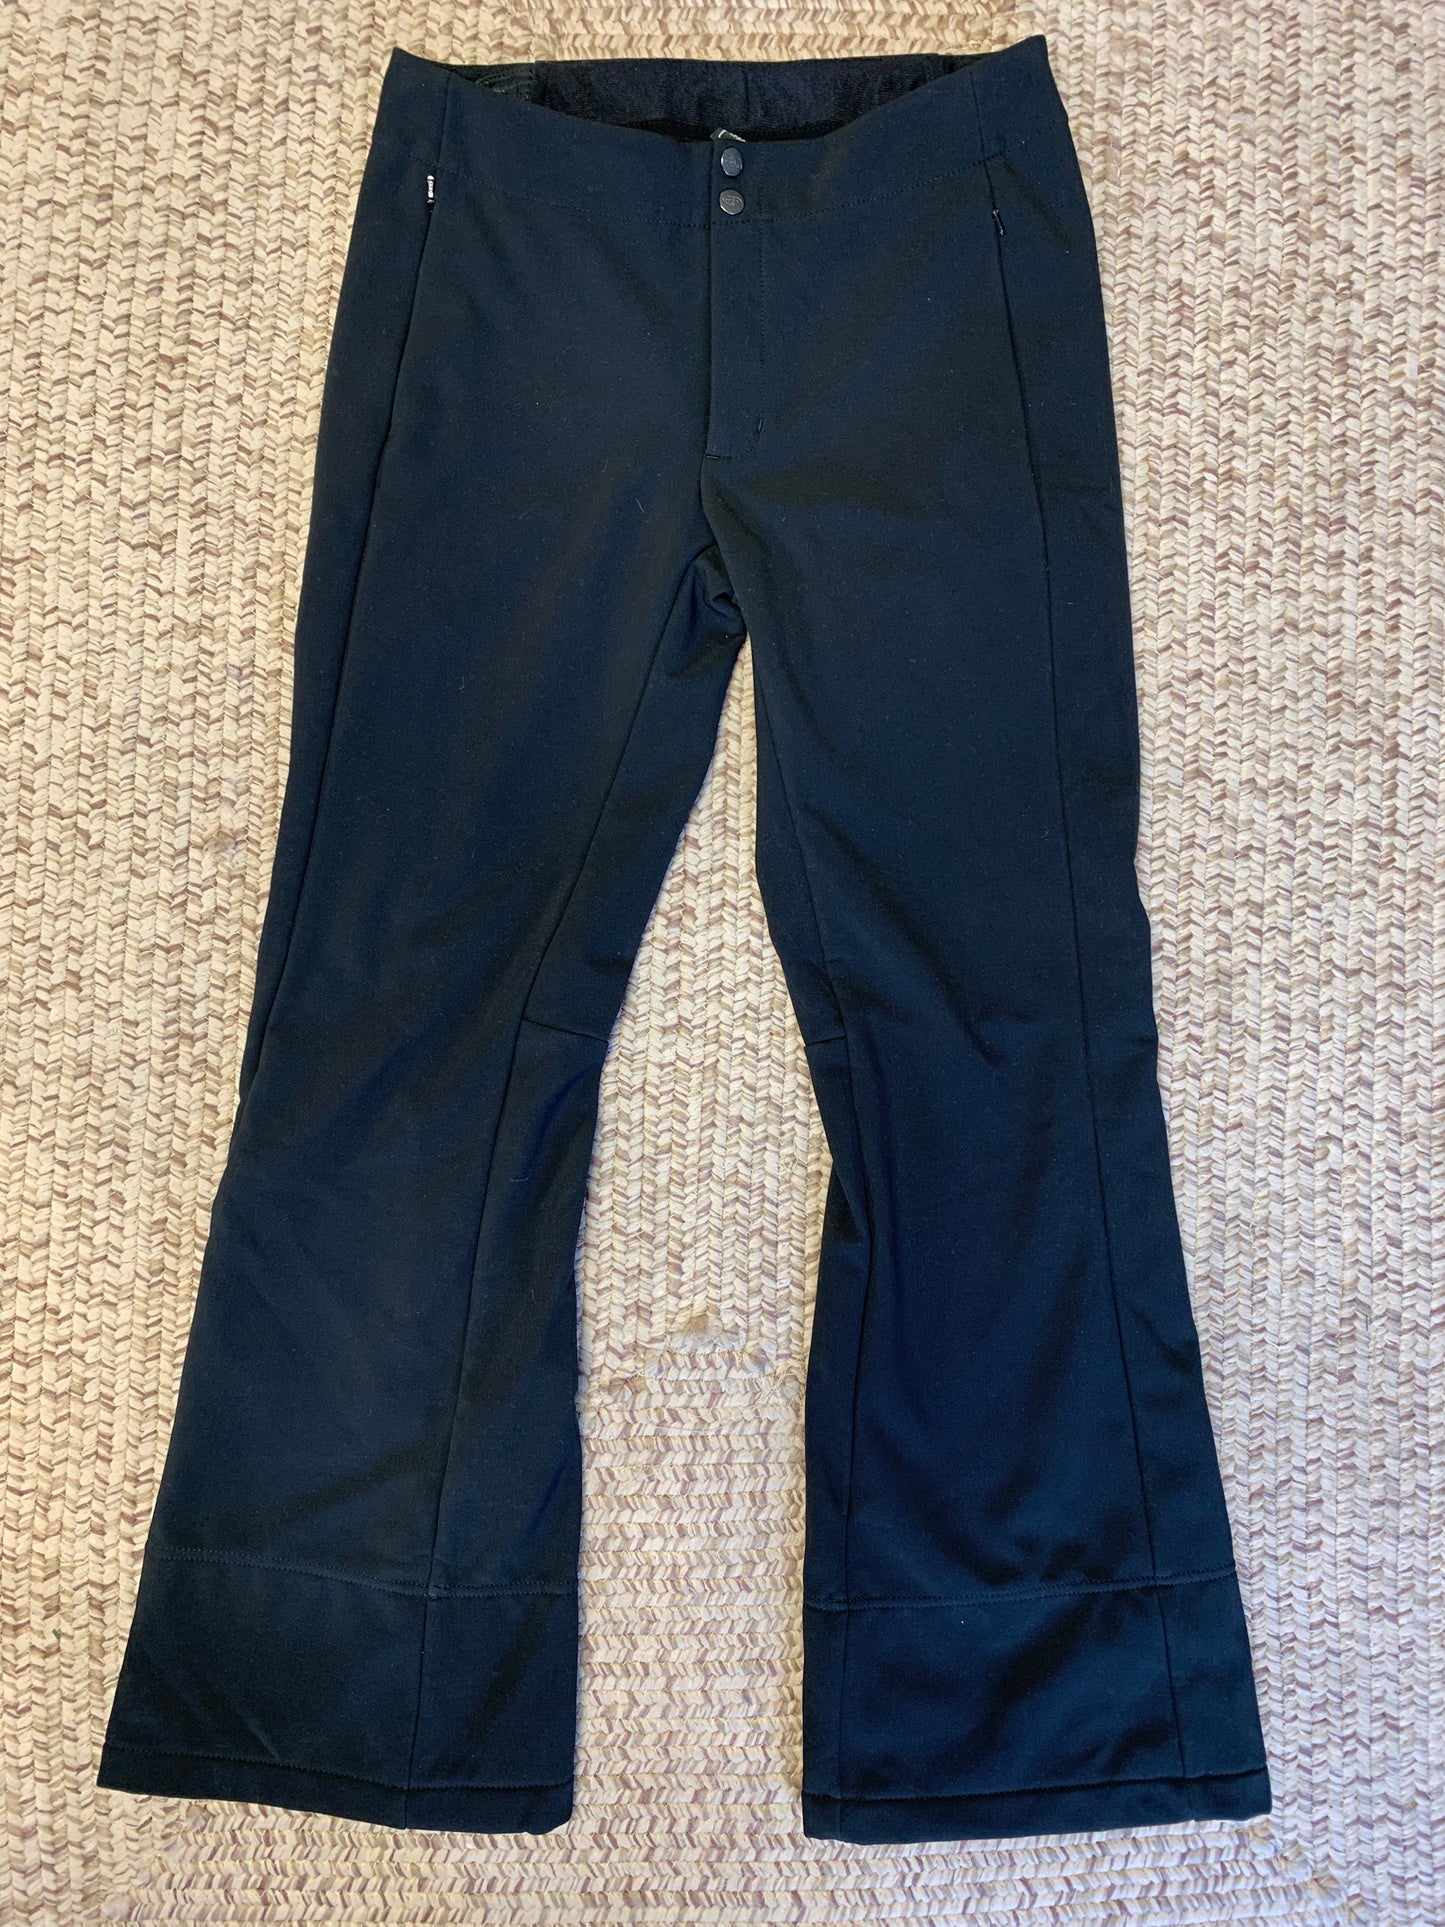 North Face Women's Black Insulated Pants Size: M/M